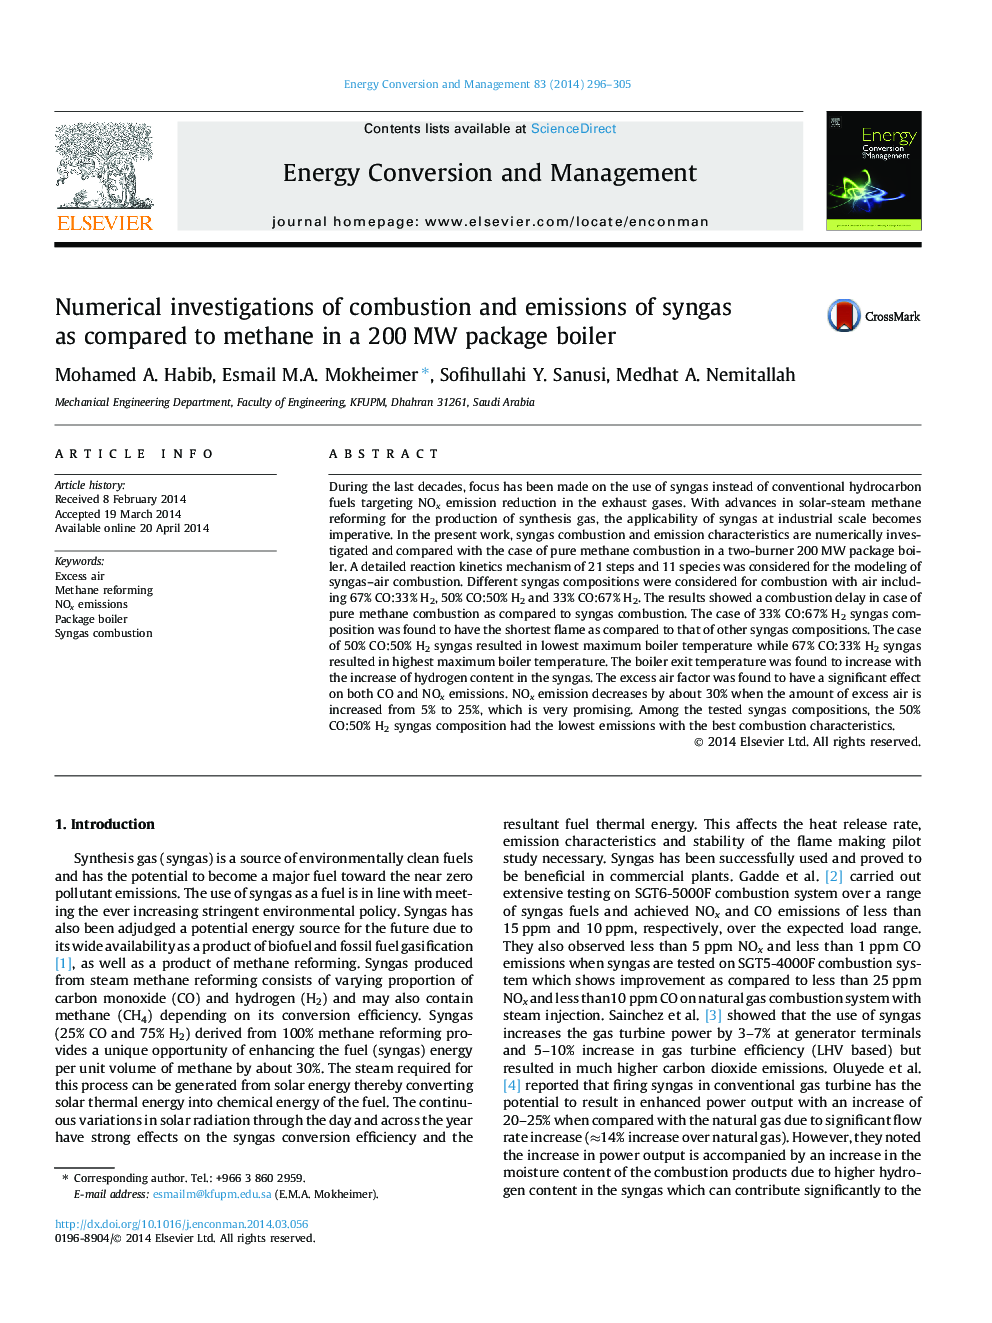 Numerical investigations of combustion and emissions of syngas as compared to methane in a 200Â MW package boiler